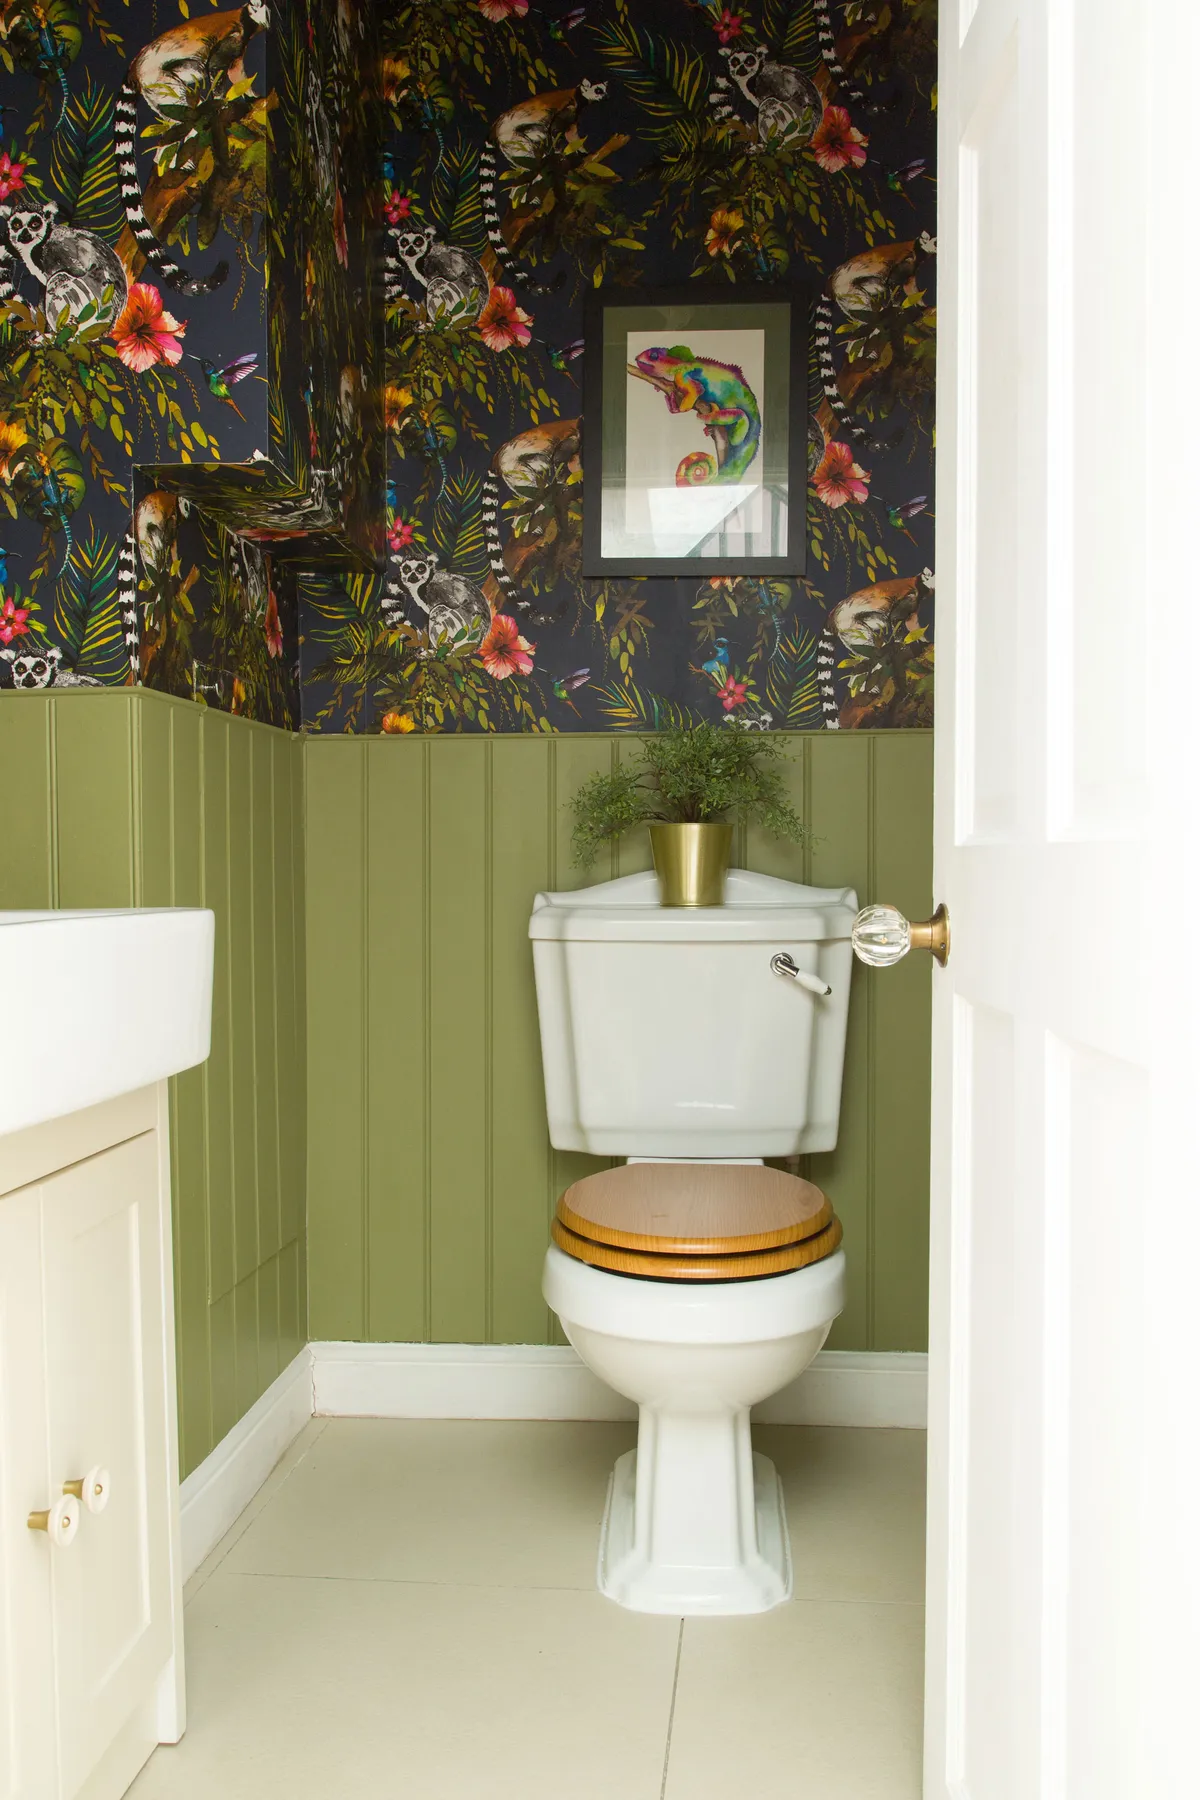 Make a feature of a cloakroom bathroom with a bold pattern. ‘We panelled the lower half of the wall so the print didn’t become overwhelming,’ says Kate. ‘It’s a super fun space, and we always get comments on it’